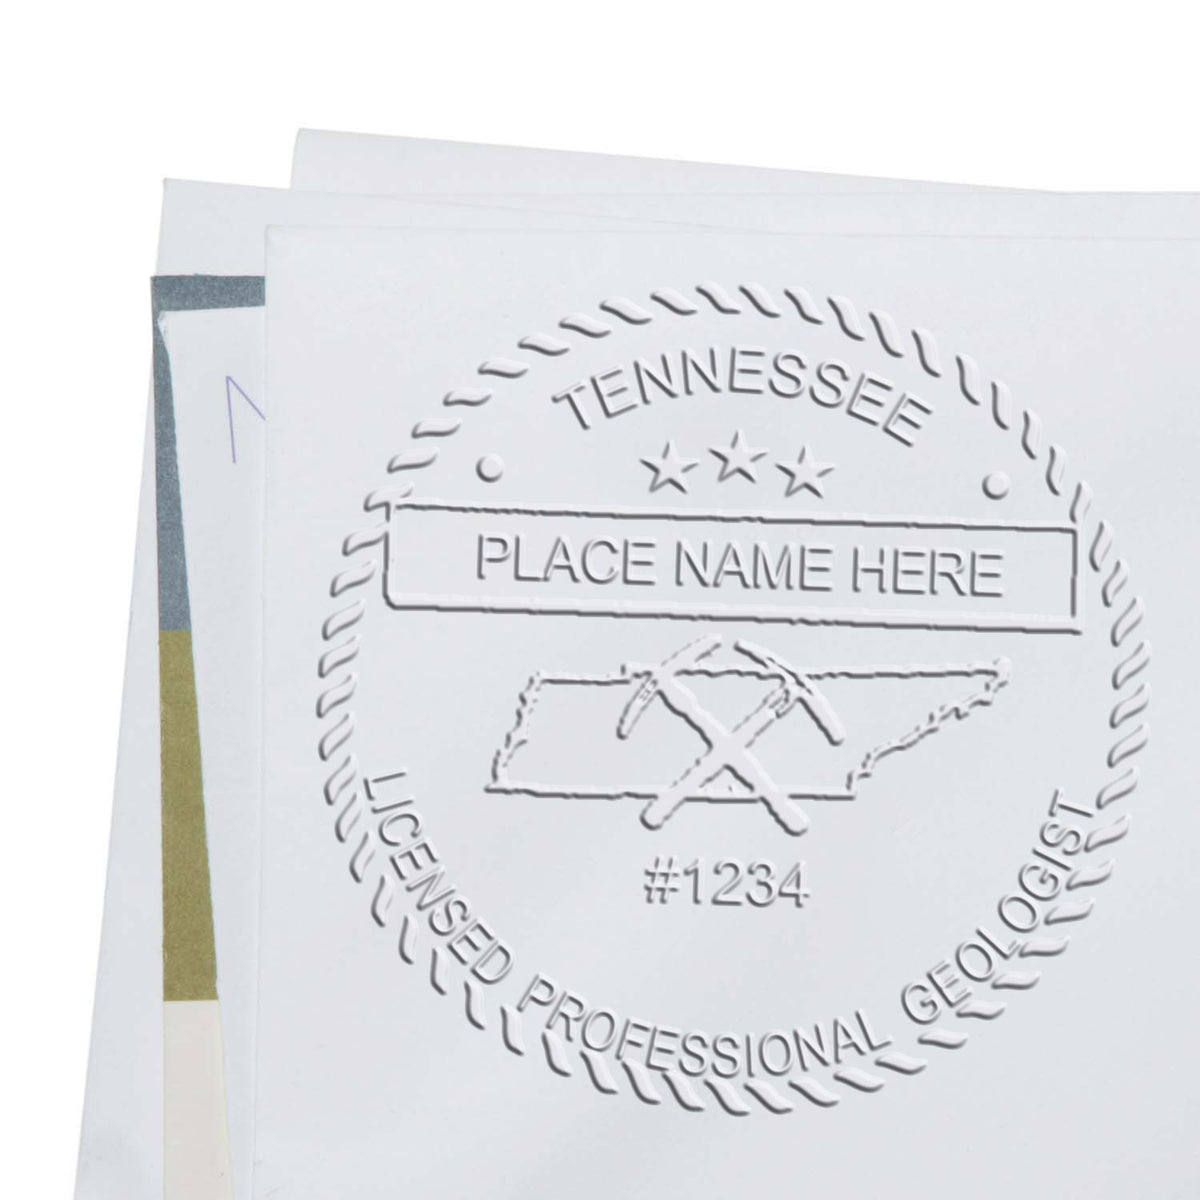 A photograph of the Gift Tennessee Geologist Seal stamp impression reveals a vivid, professional image of the on paper.